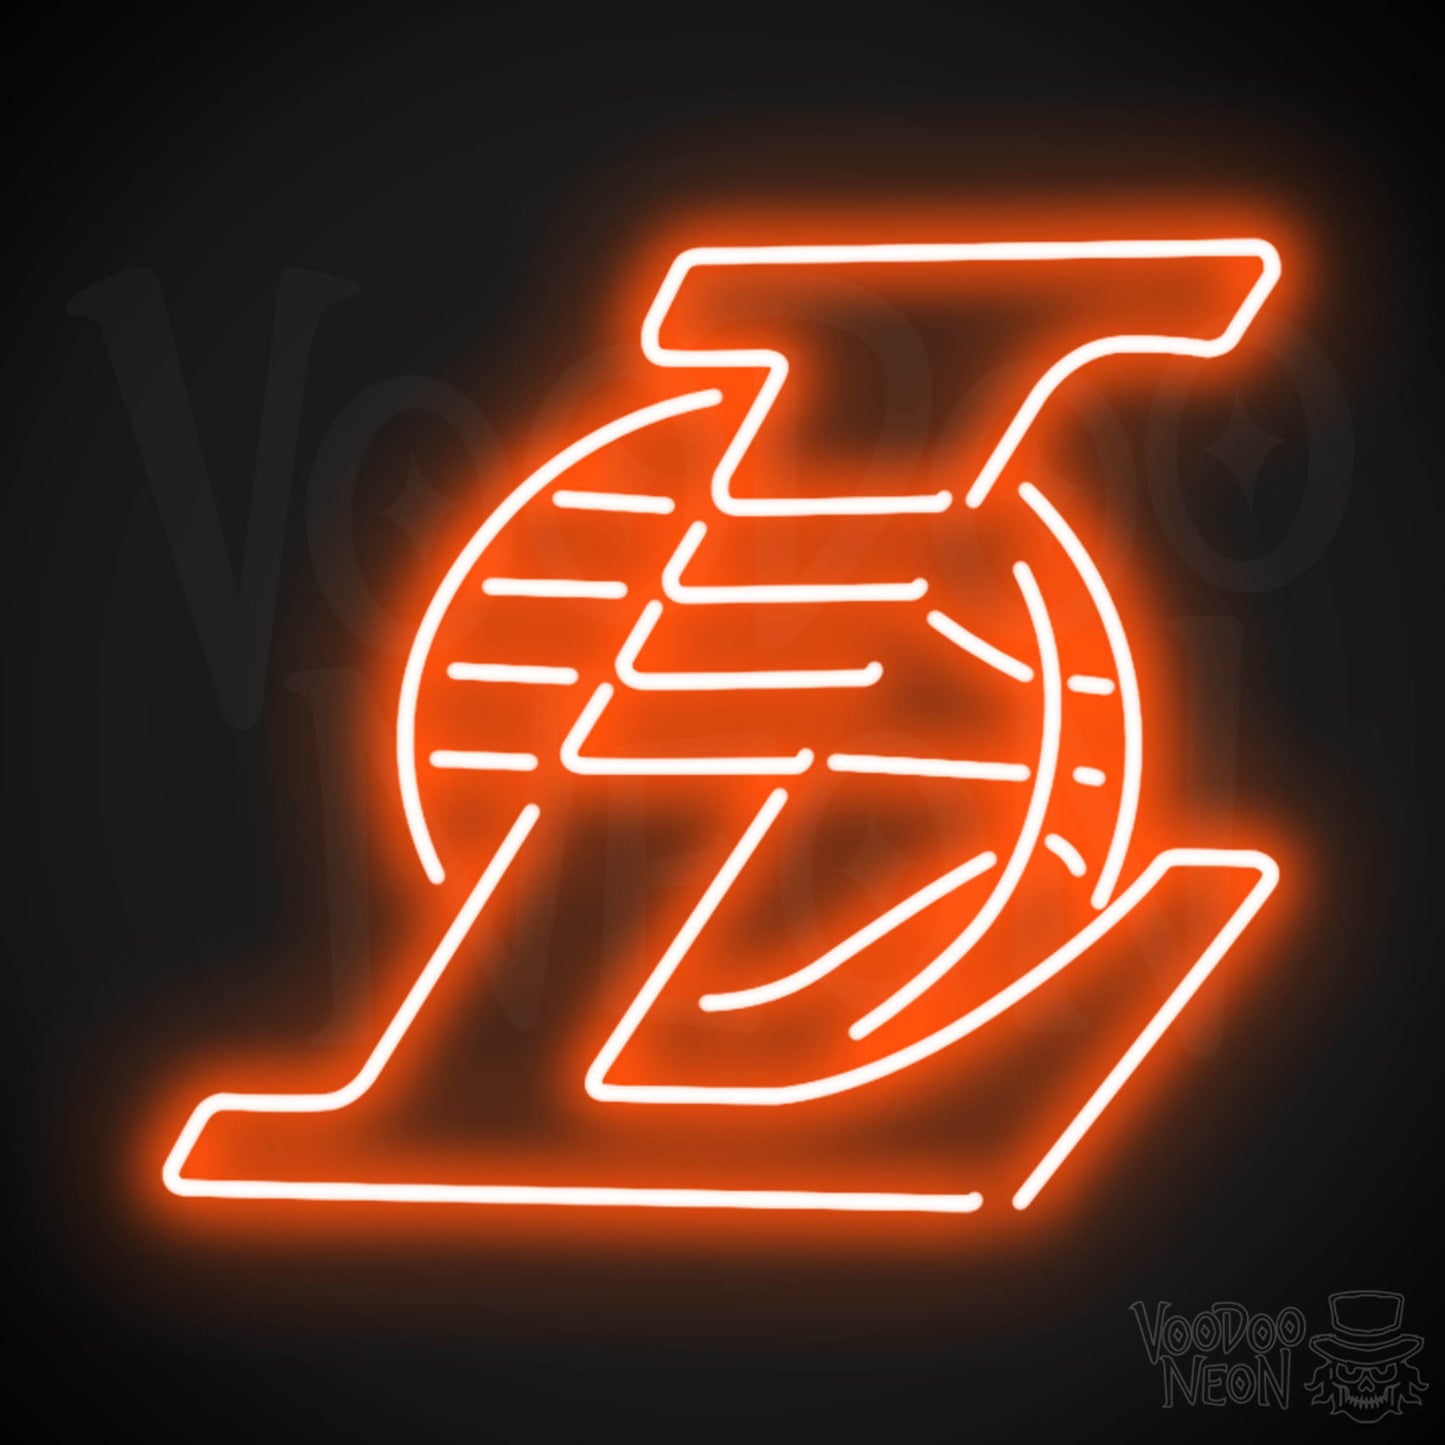 Los Angeles Lakers Neon Sign - Los Angeles Lakers Sign - Neon Lakers Logo Wall Art - Color Orange